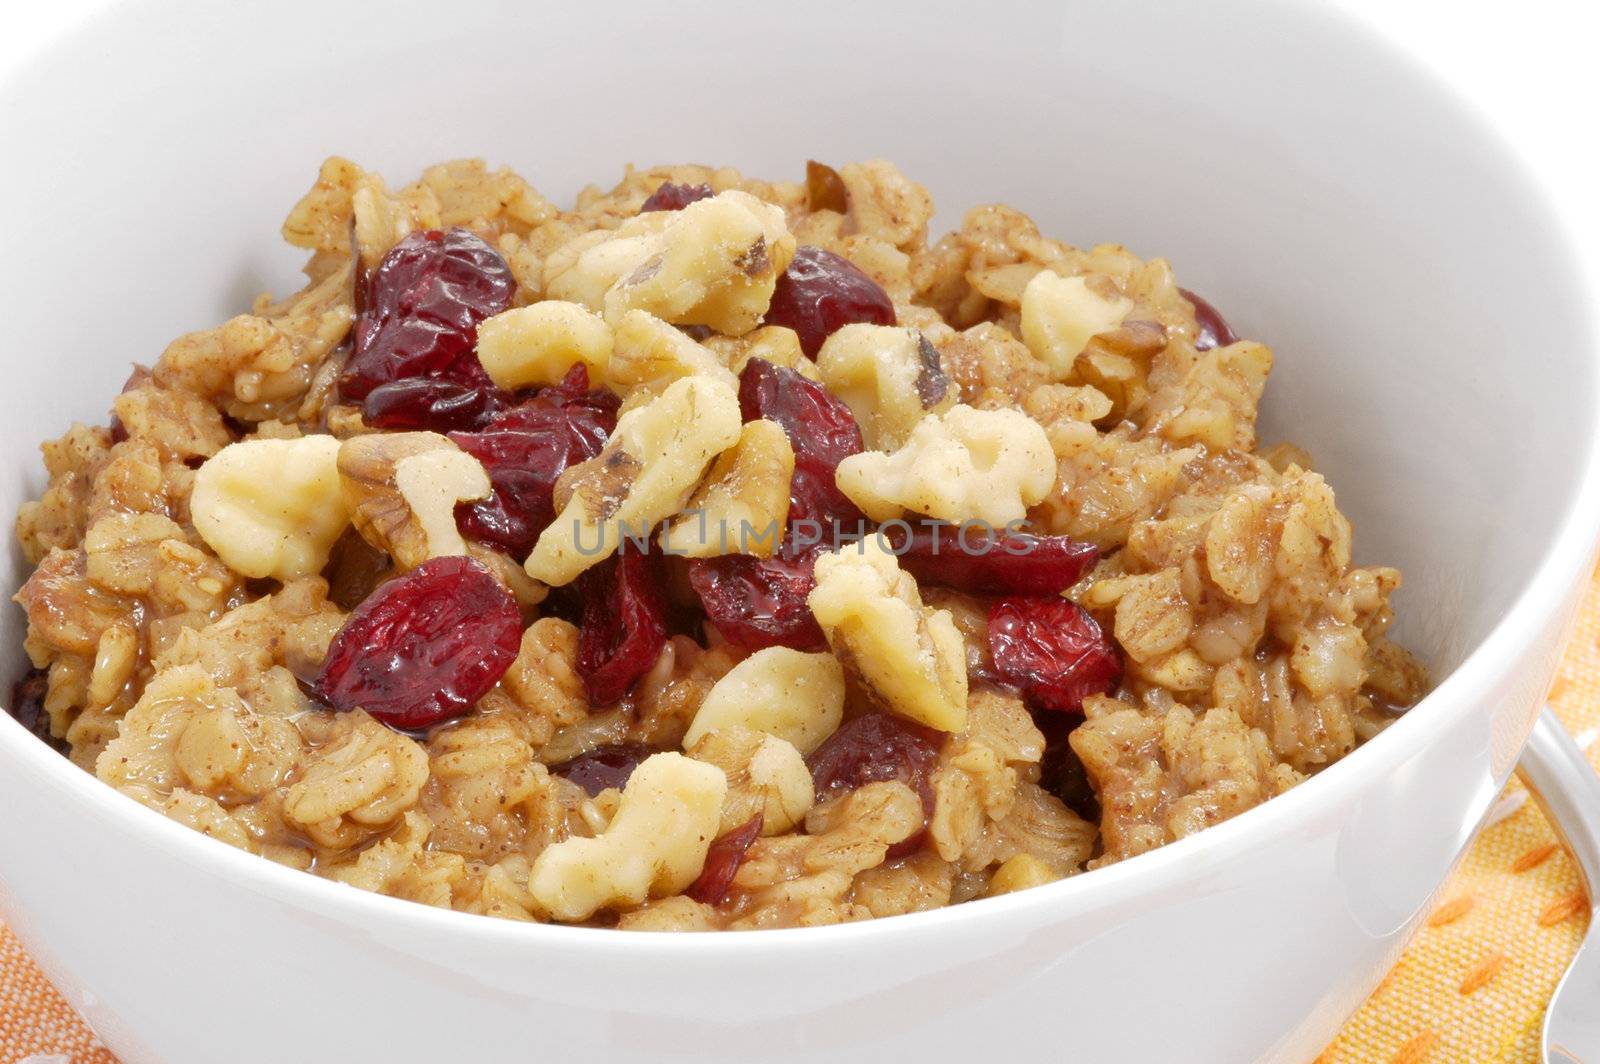 Bowl of oatmeal with dried fruit and nuts.